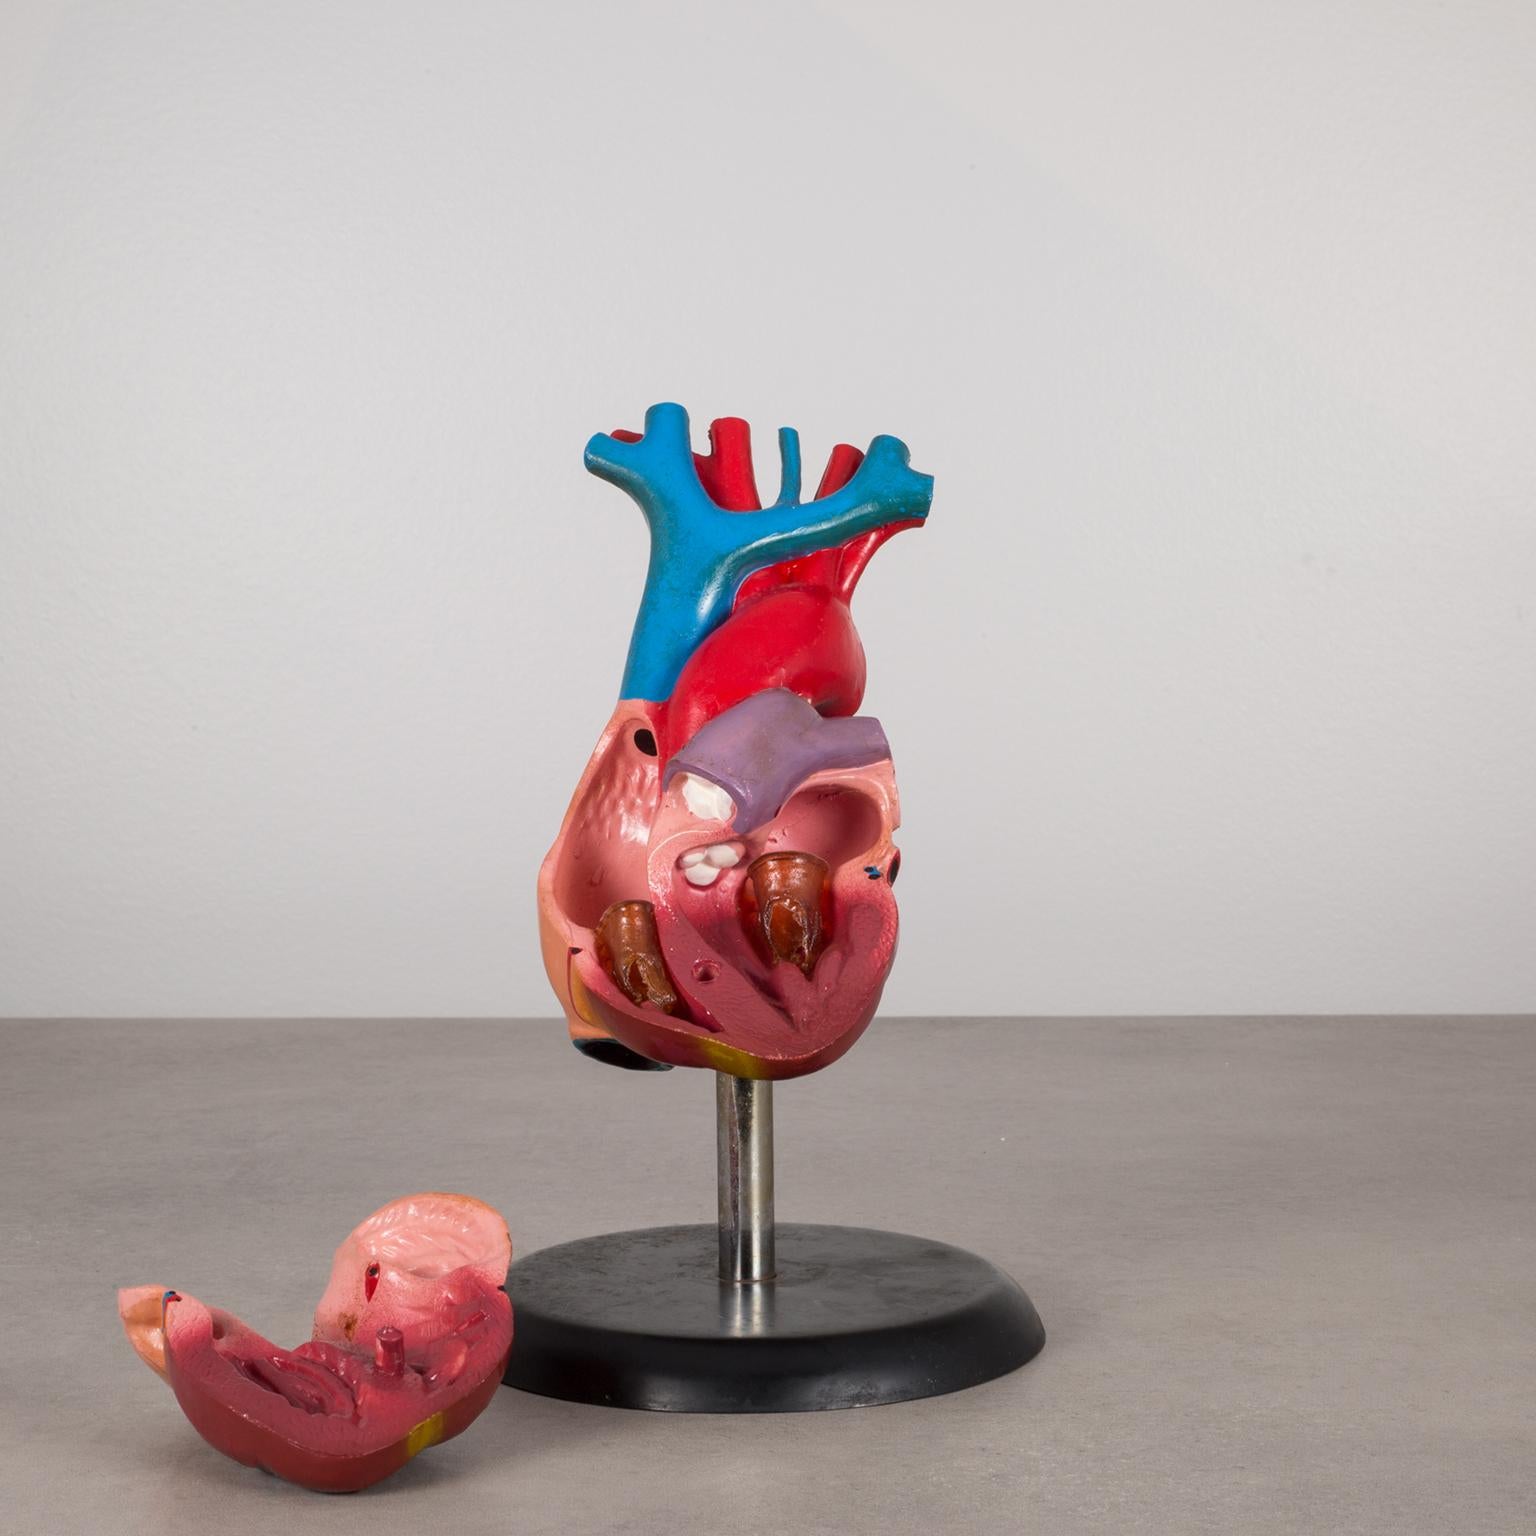 ABOUT

This is a realistically detailed plastic model of a human heart from the 1970s. It opens when assembled so you can explore it from the inside. It includes a stand and features the superior and inferior venae cavae, right and left atria,